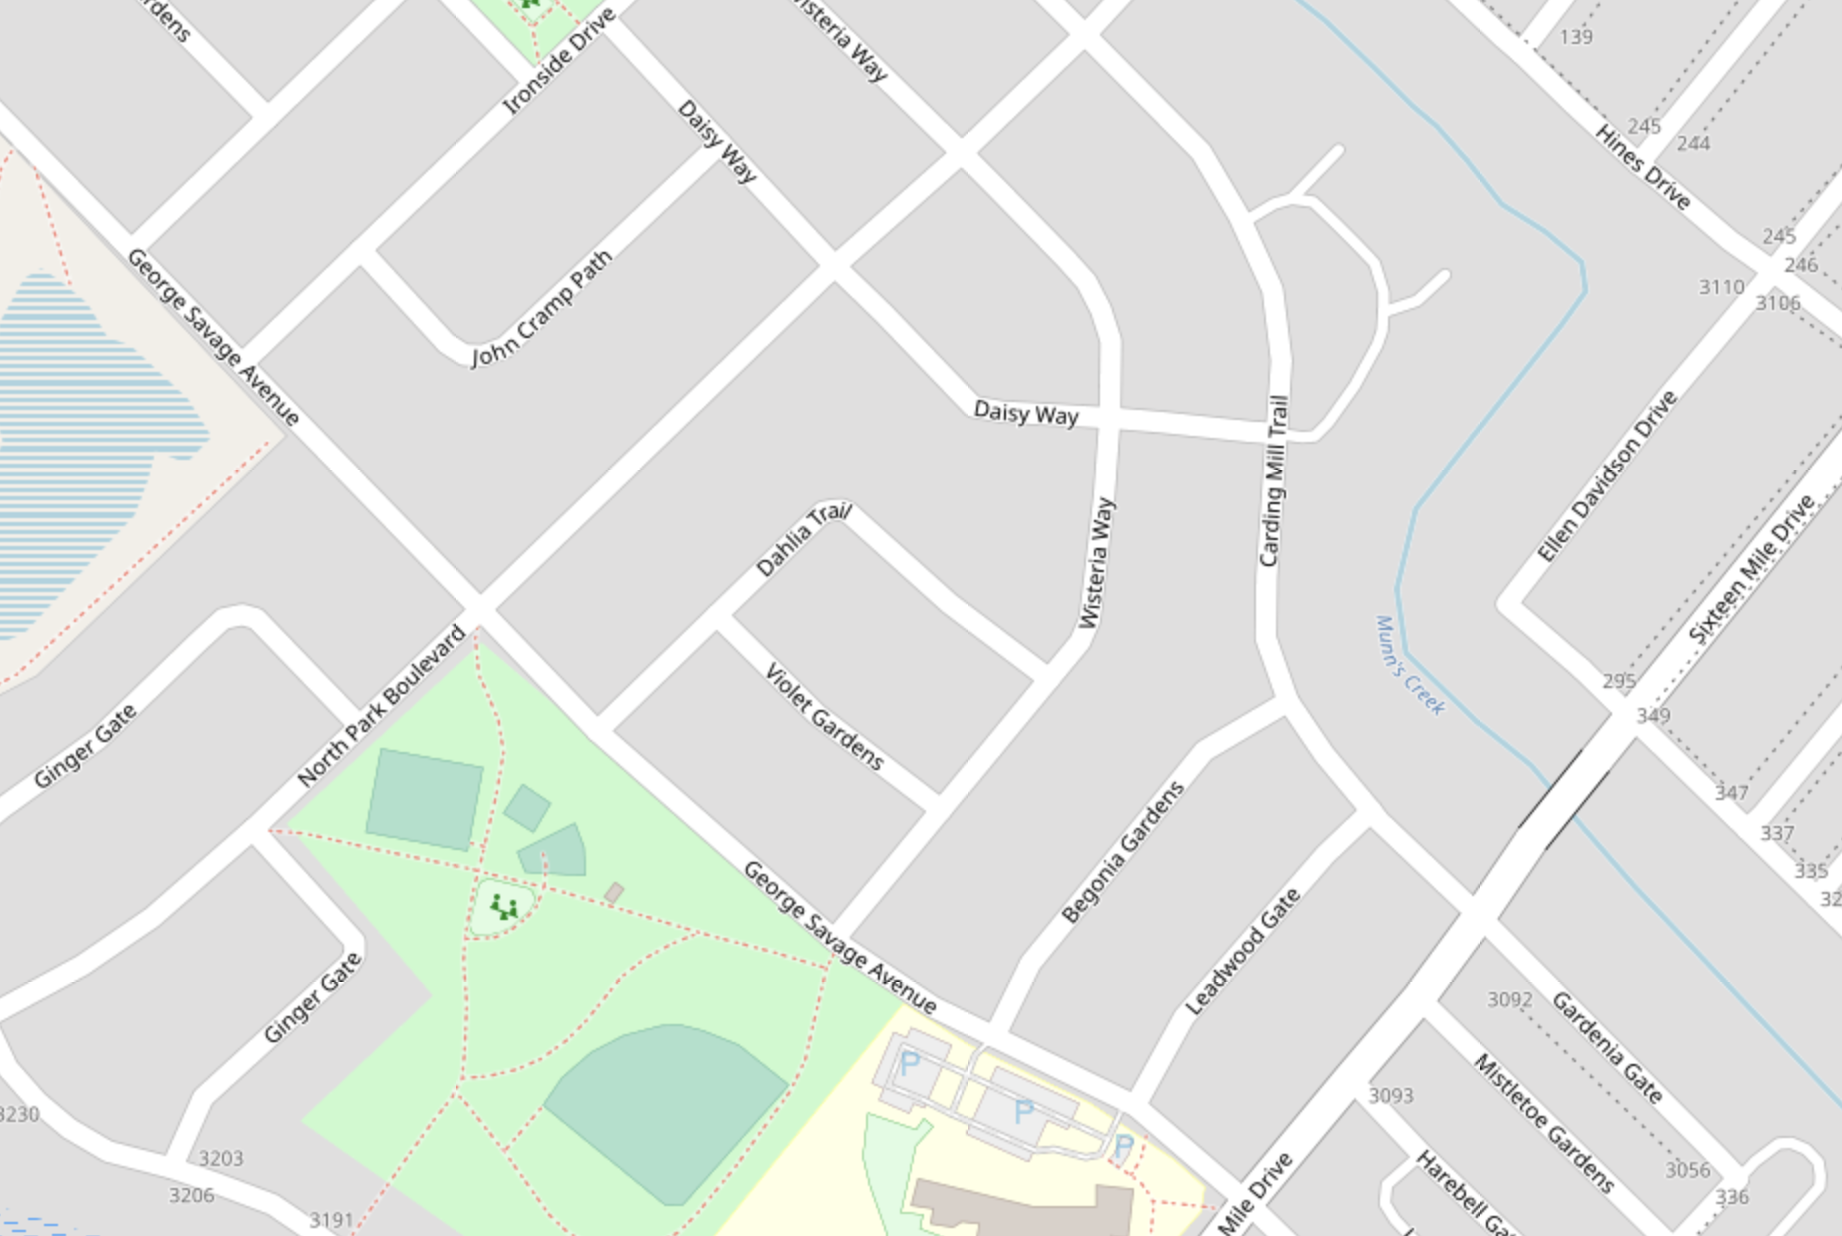 Wisteria Way and Violet Gardens | Openstreetmap